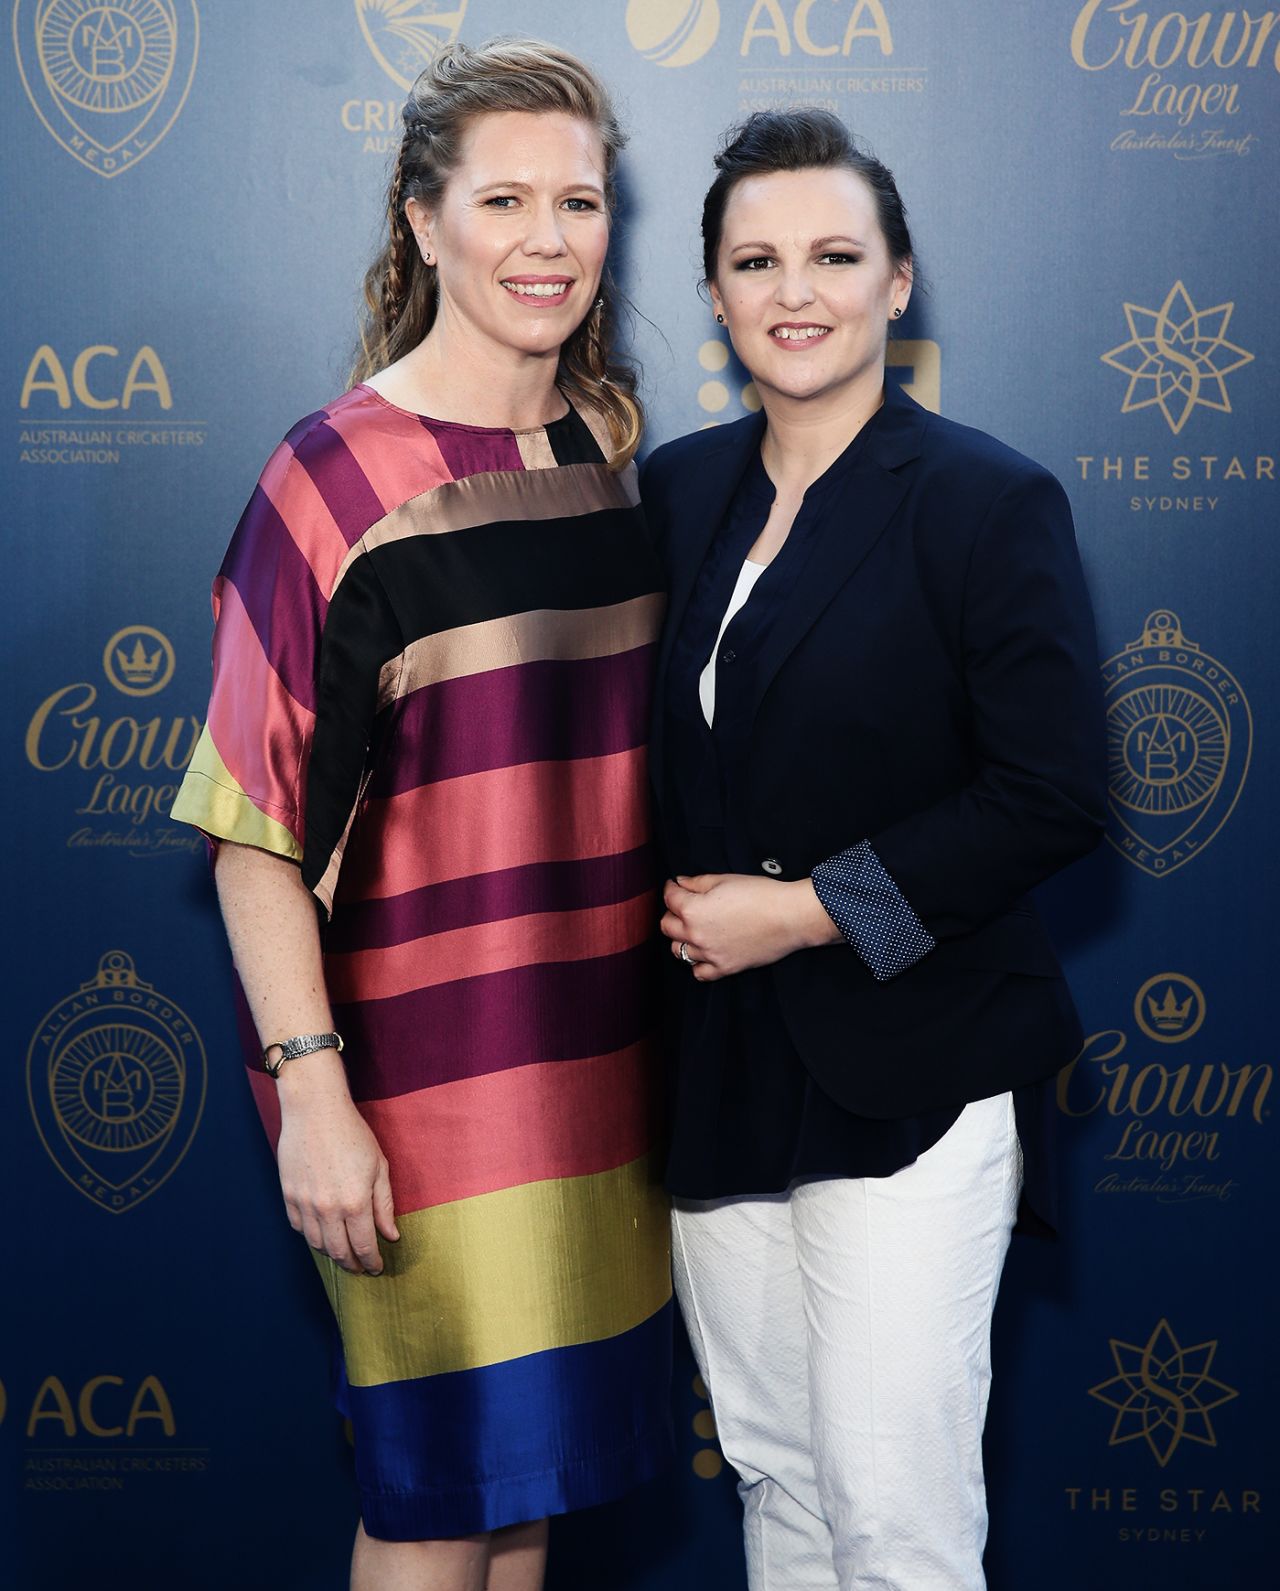 Alex Blackwell and her wife Lynsey Askew at the Allan Border Medal, Sydney, January 23, 2017